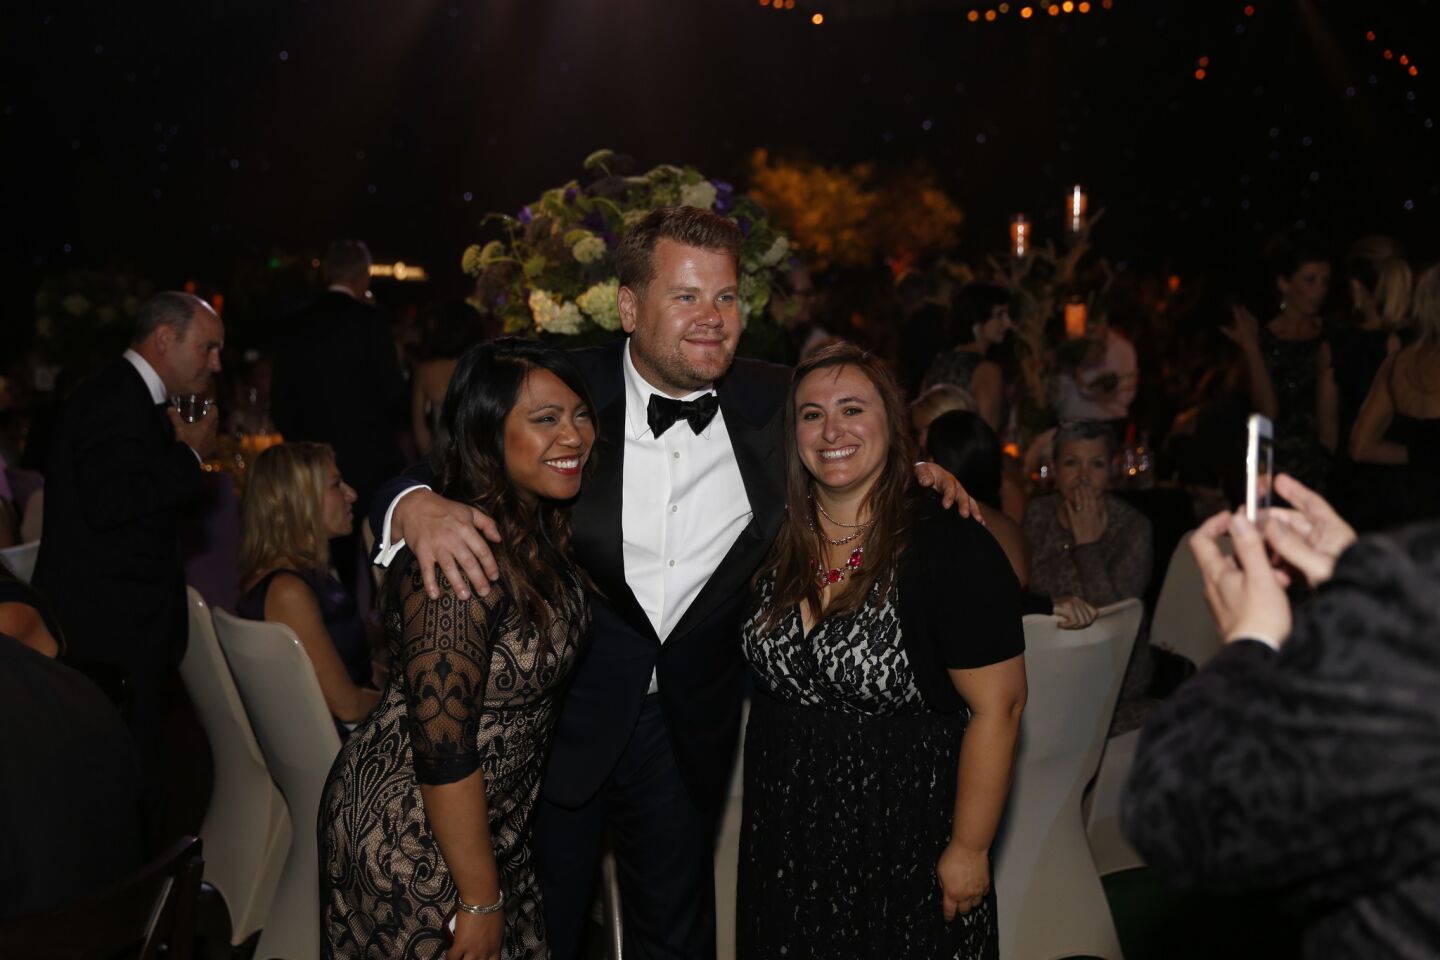 James Corden poses with fans at the Governors Ball after the 68th Primetime Emmy Awards.